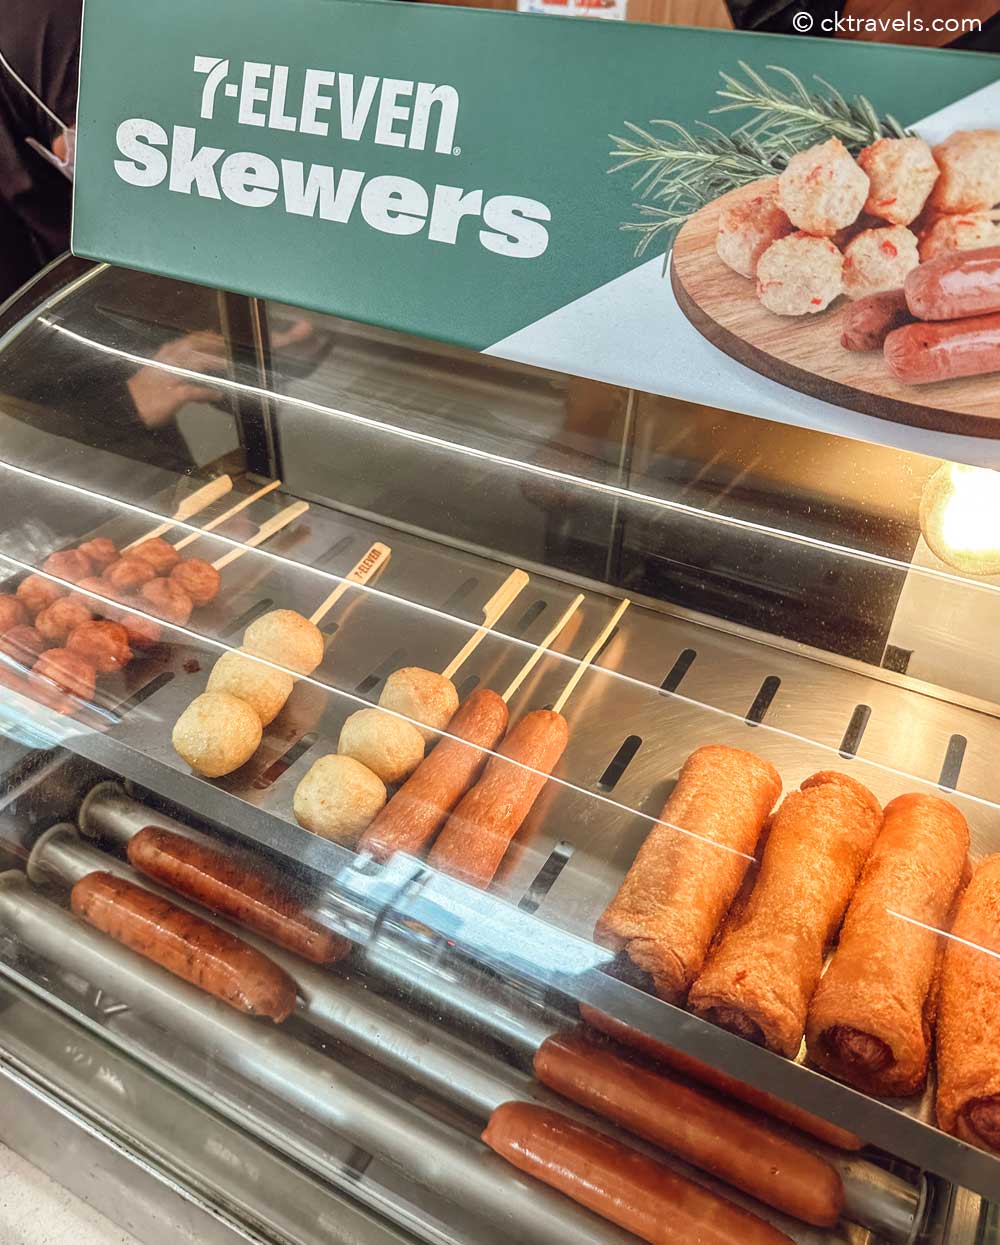 Malaysia 7-Eleven Stores - meat skewers